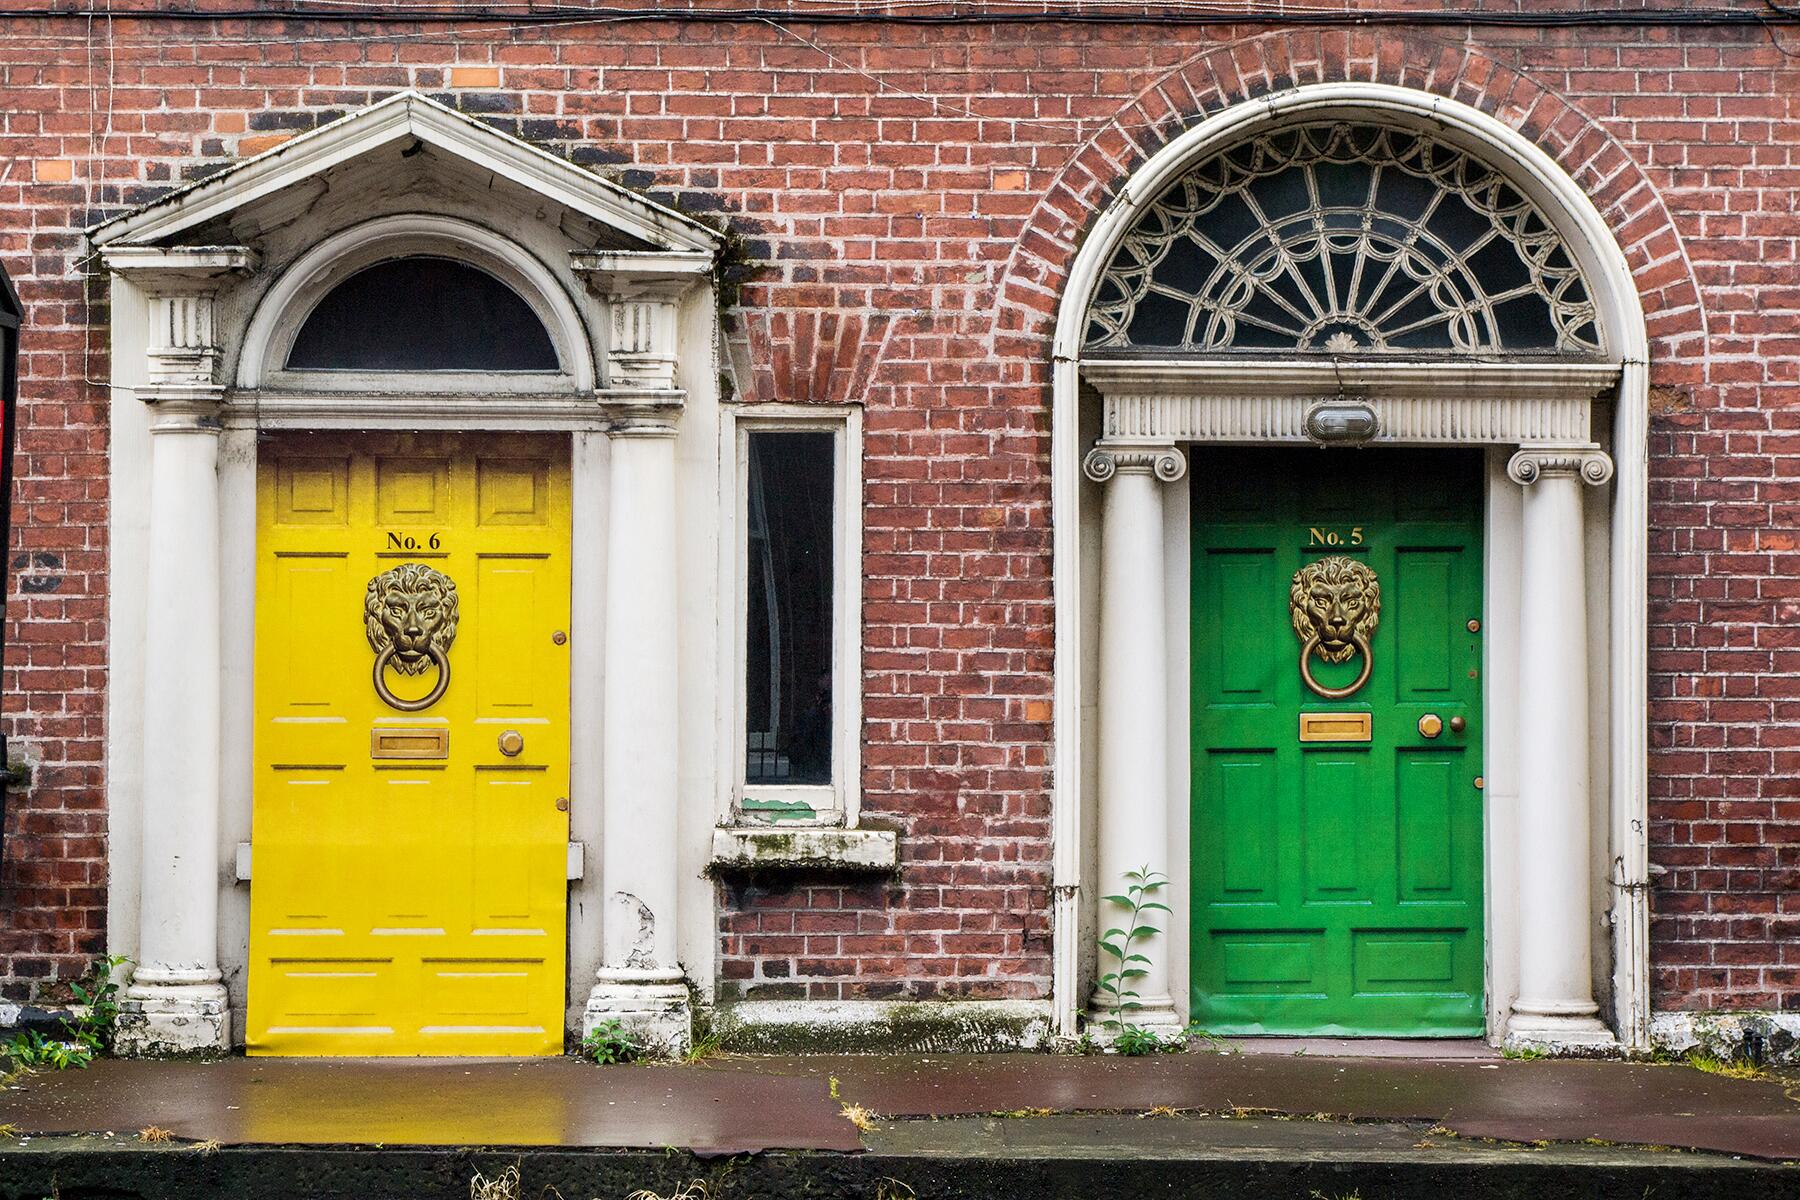 <a href='https://www.fodors.com/world/europe/ireland/experiences/news/photos/ultimate-things-to-do-in-ireland#'>From &quot;25 Ultimate Things to Do In Ireland: Visit Galleries and Museums in Dublin’s Georgian Quarter&quot;</a>